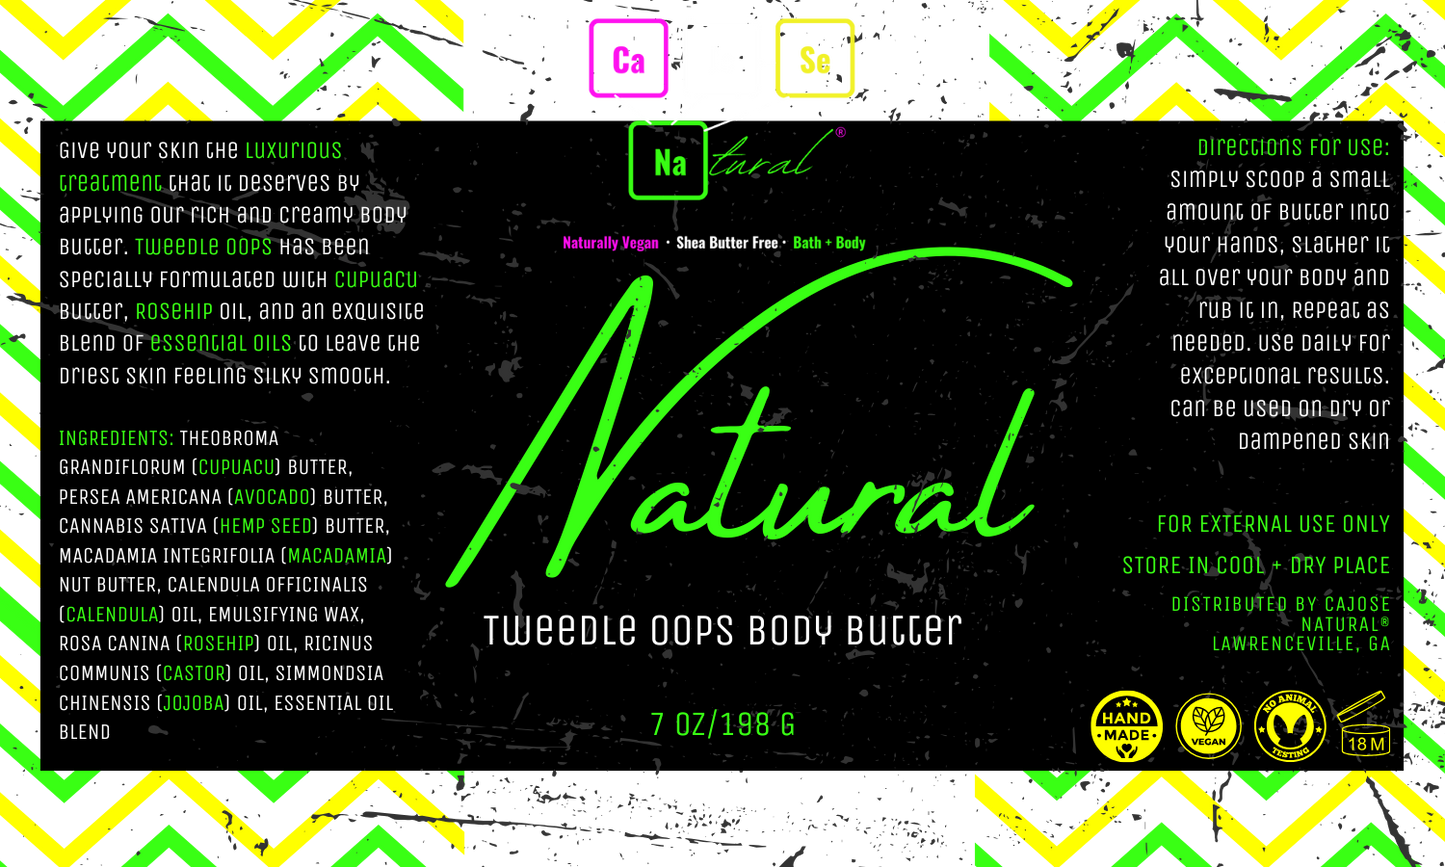 Tweedle Oops Body Butter - CaJoSe Natural